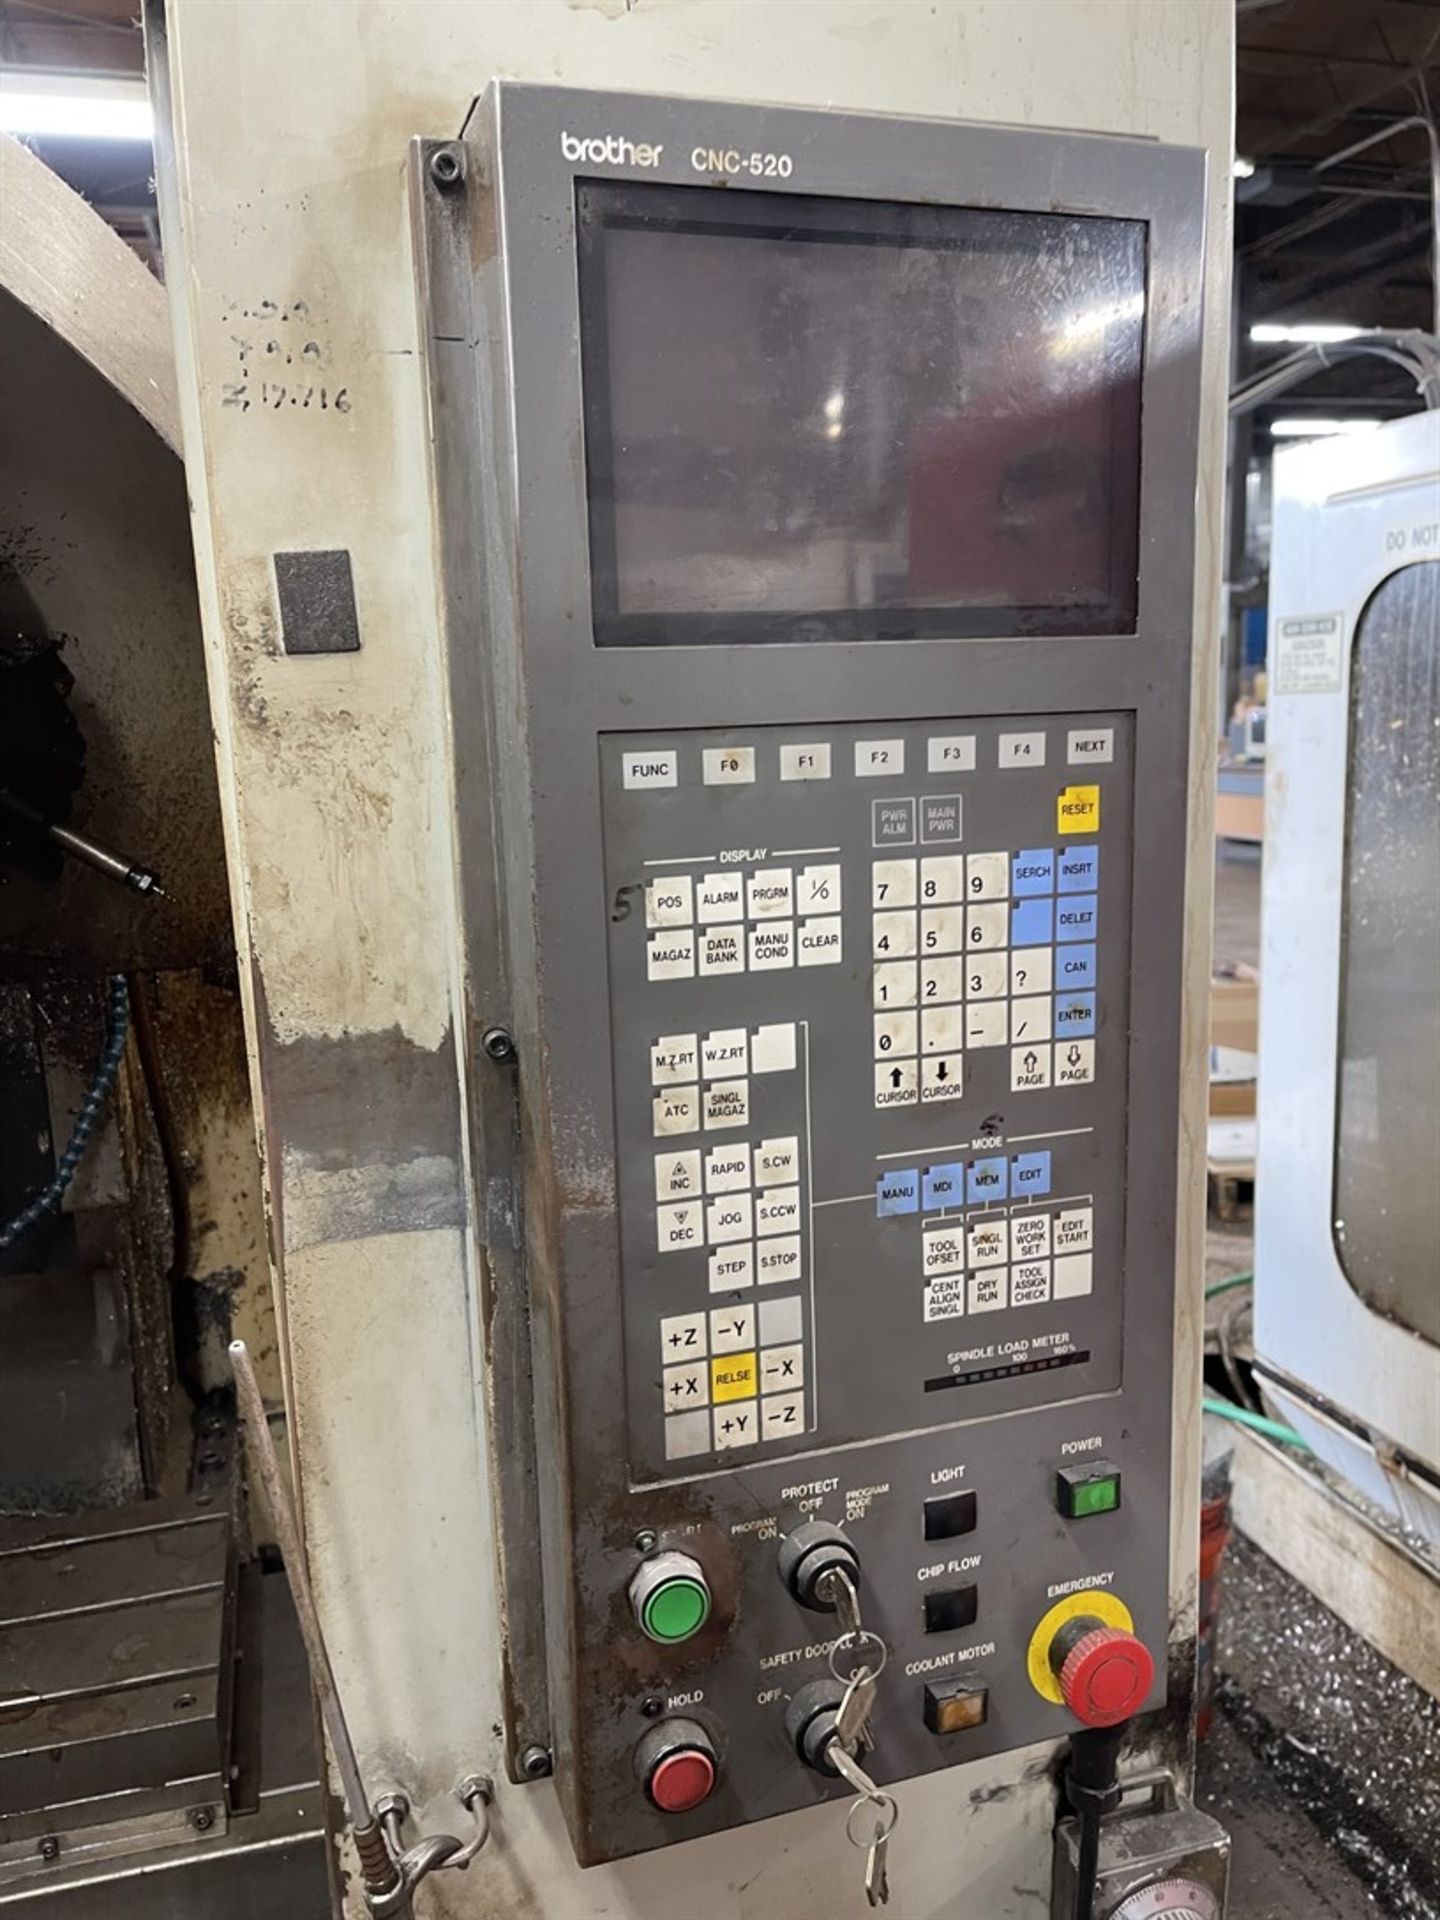 BROTHER TC-227 CNC Drilling & Tapping Center, s/n 111215, CNC 520 Control, 16.5” X, 11.8” Y, 9.8” Z, - Image 6 of 7